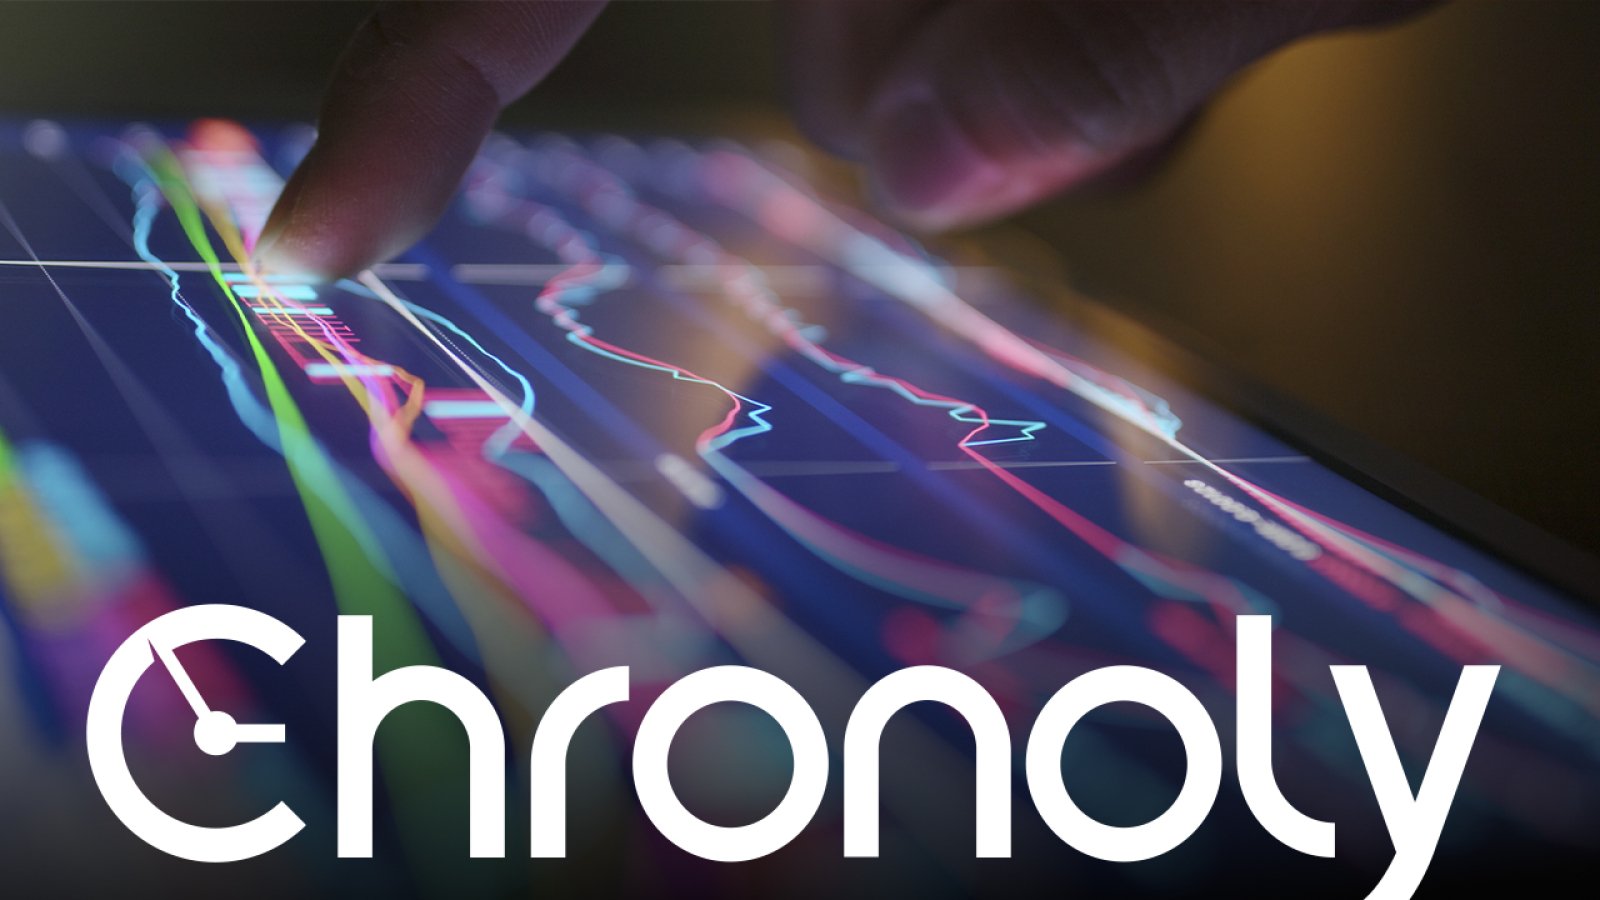 Chronoly (CRNO) Token Pre-Sale Now Live As Decentraland (MANA) And The Sandbox (SAND) Trade Sideways